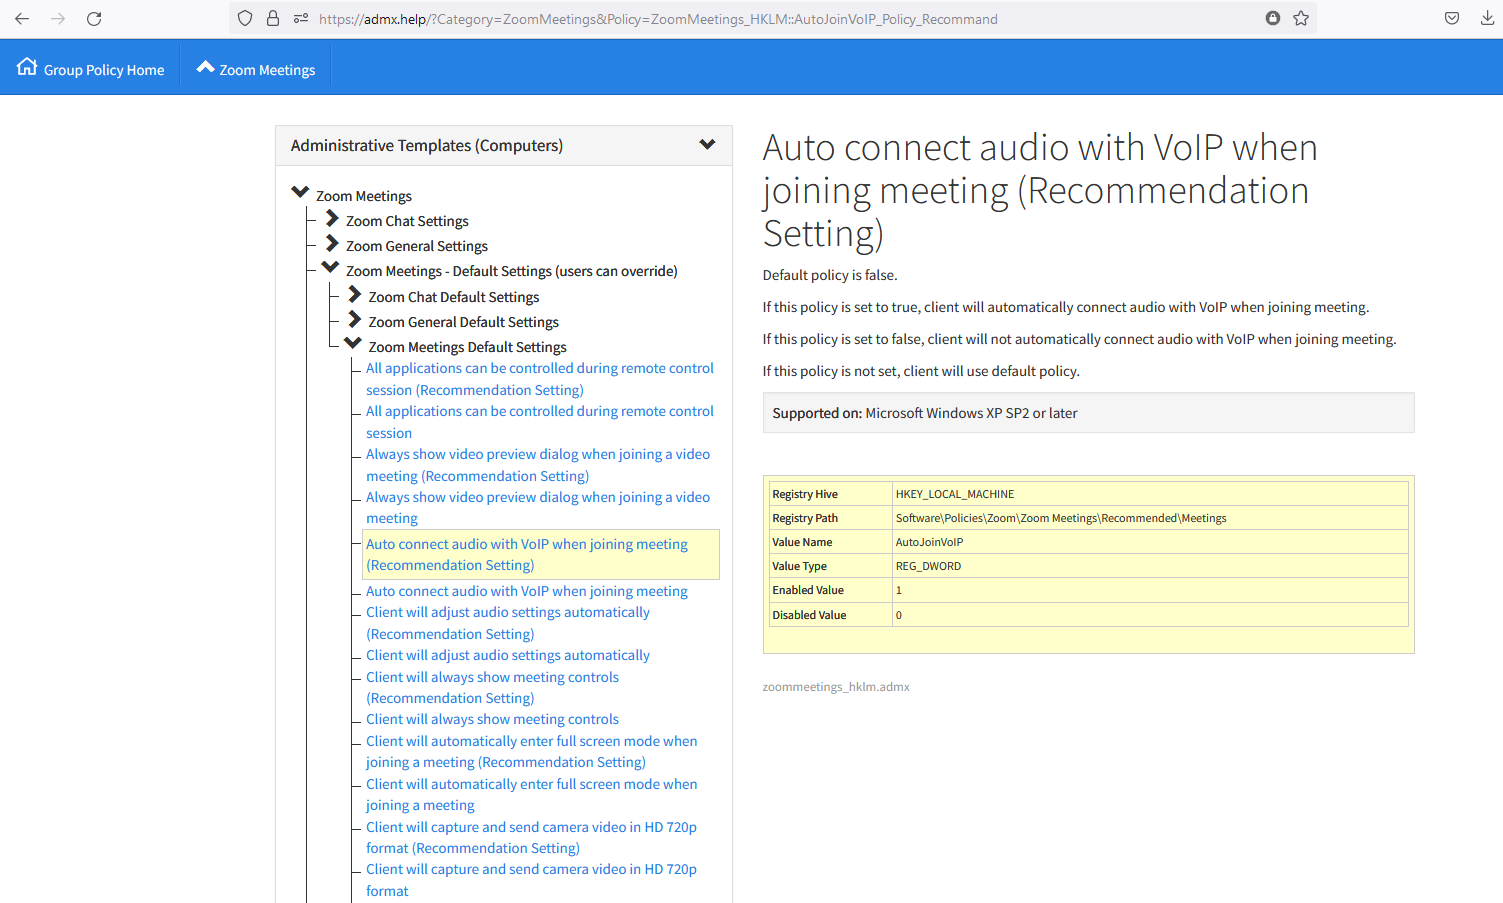 Image that shows admx.help's description of the "Auto connect audio with VoIP when joining meeting (Recommendation Setting)" entry